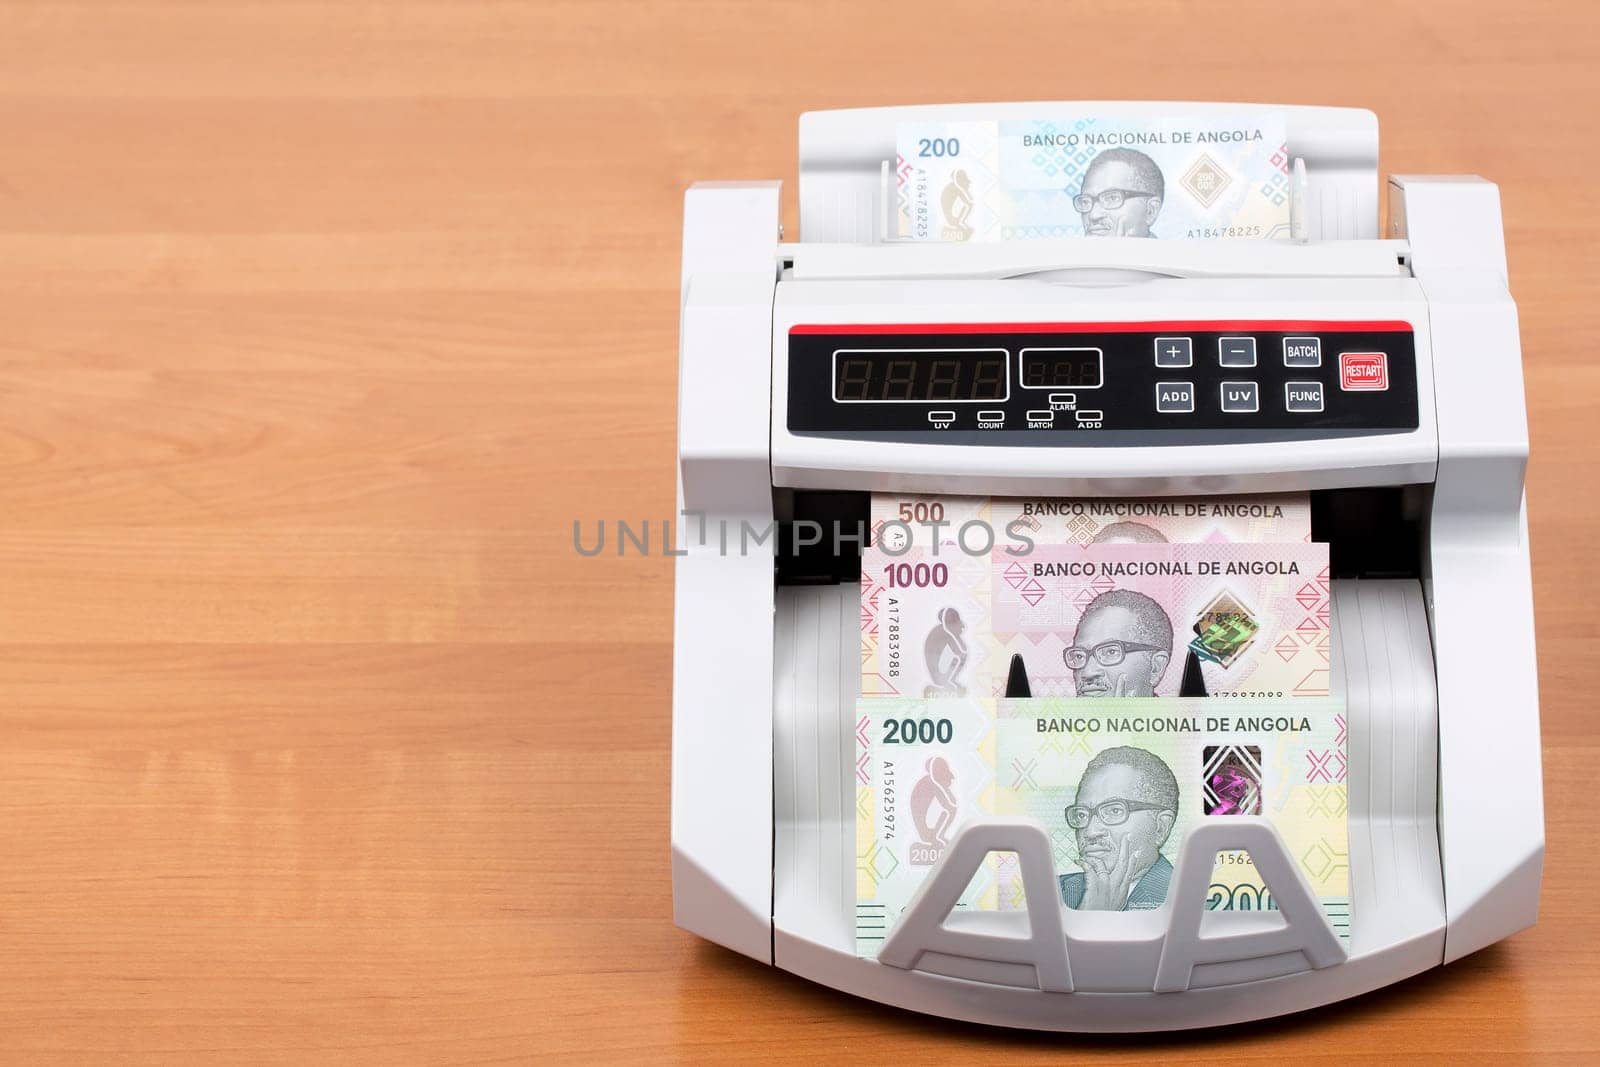 Angolan money - Kwanza a new series of banknotes in the counting machine